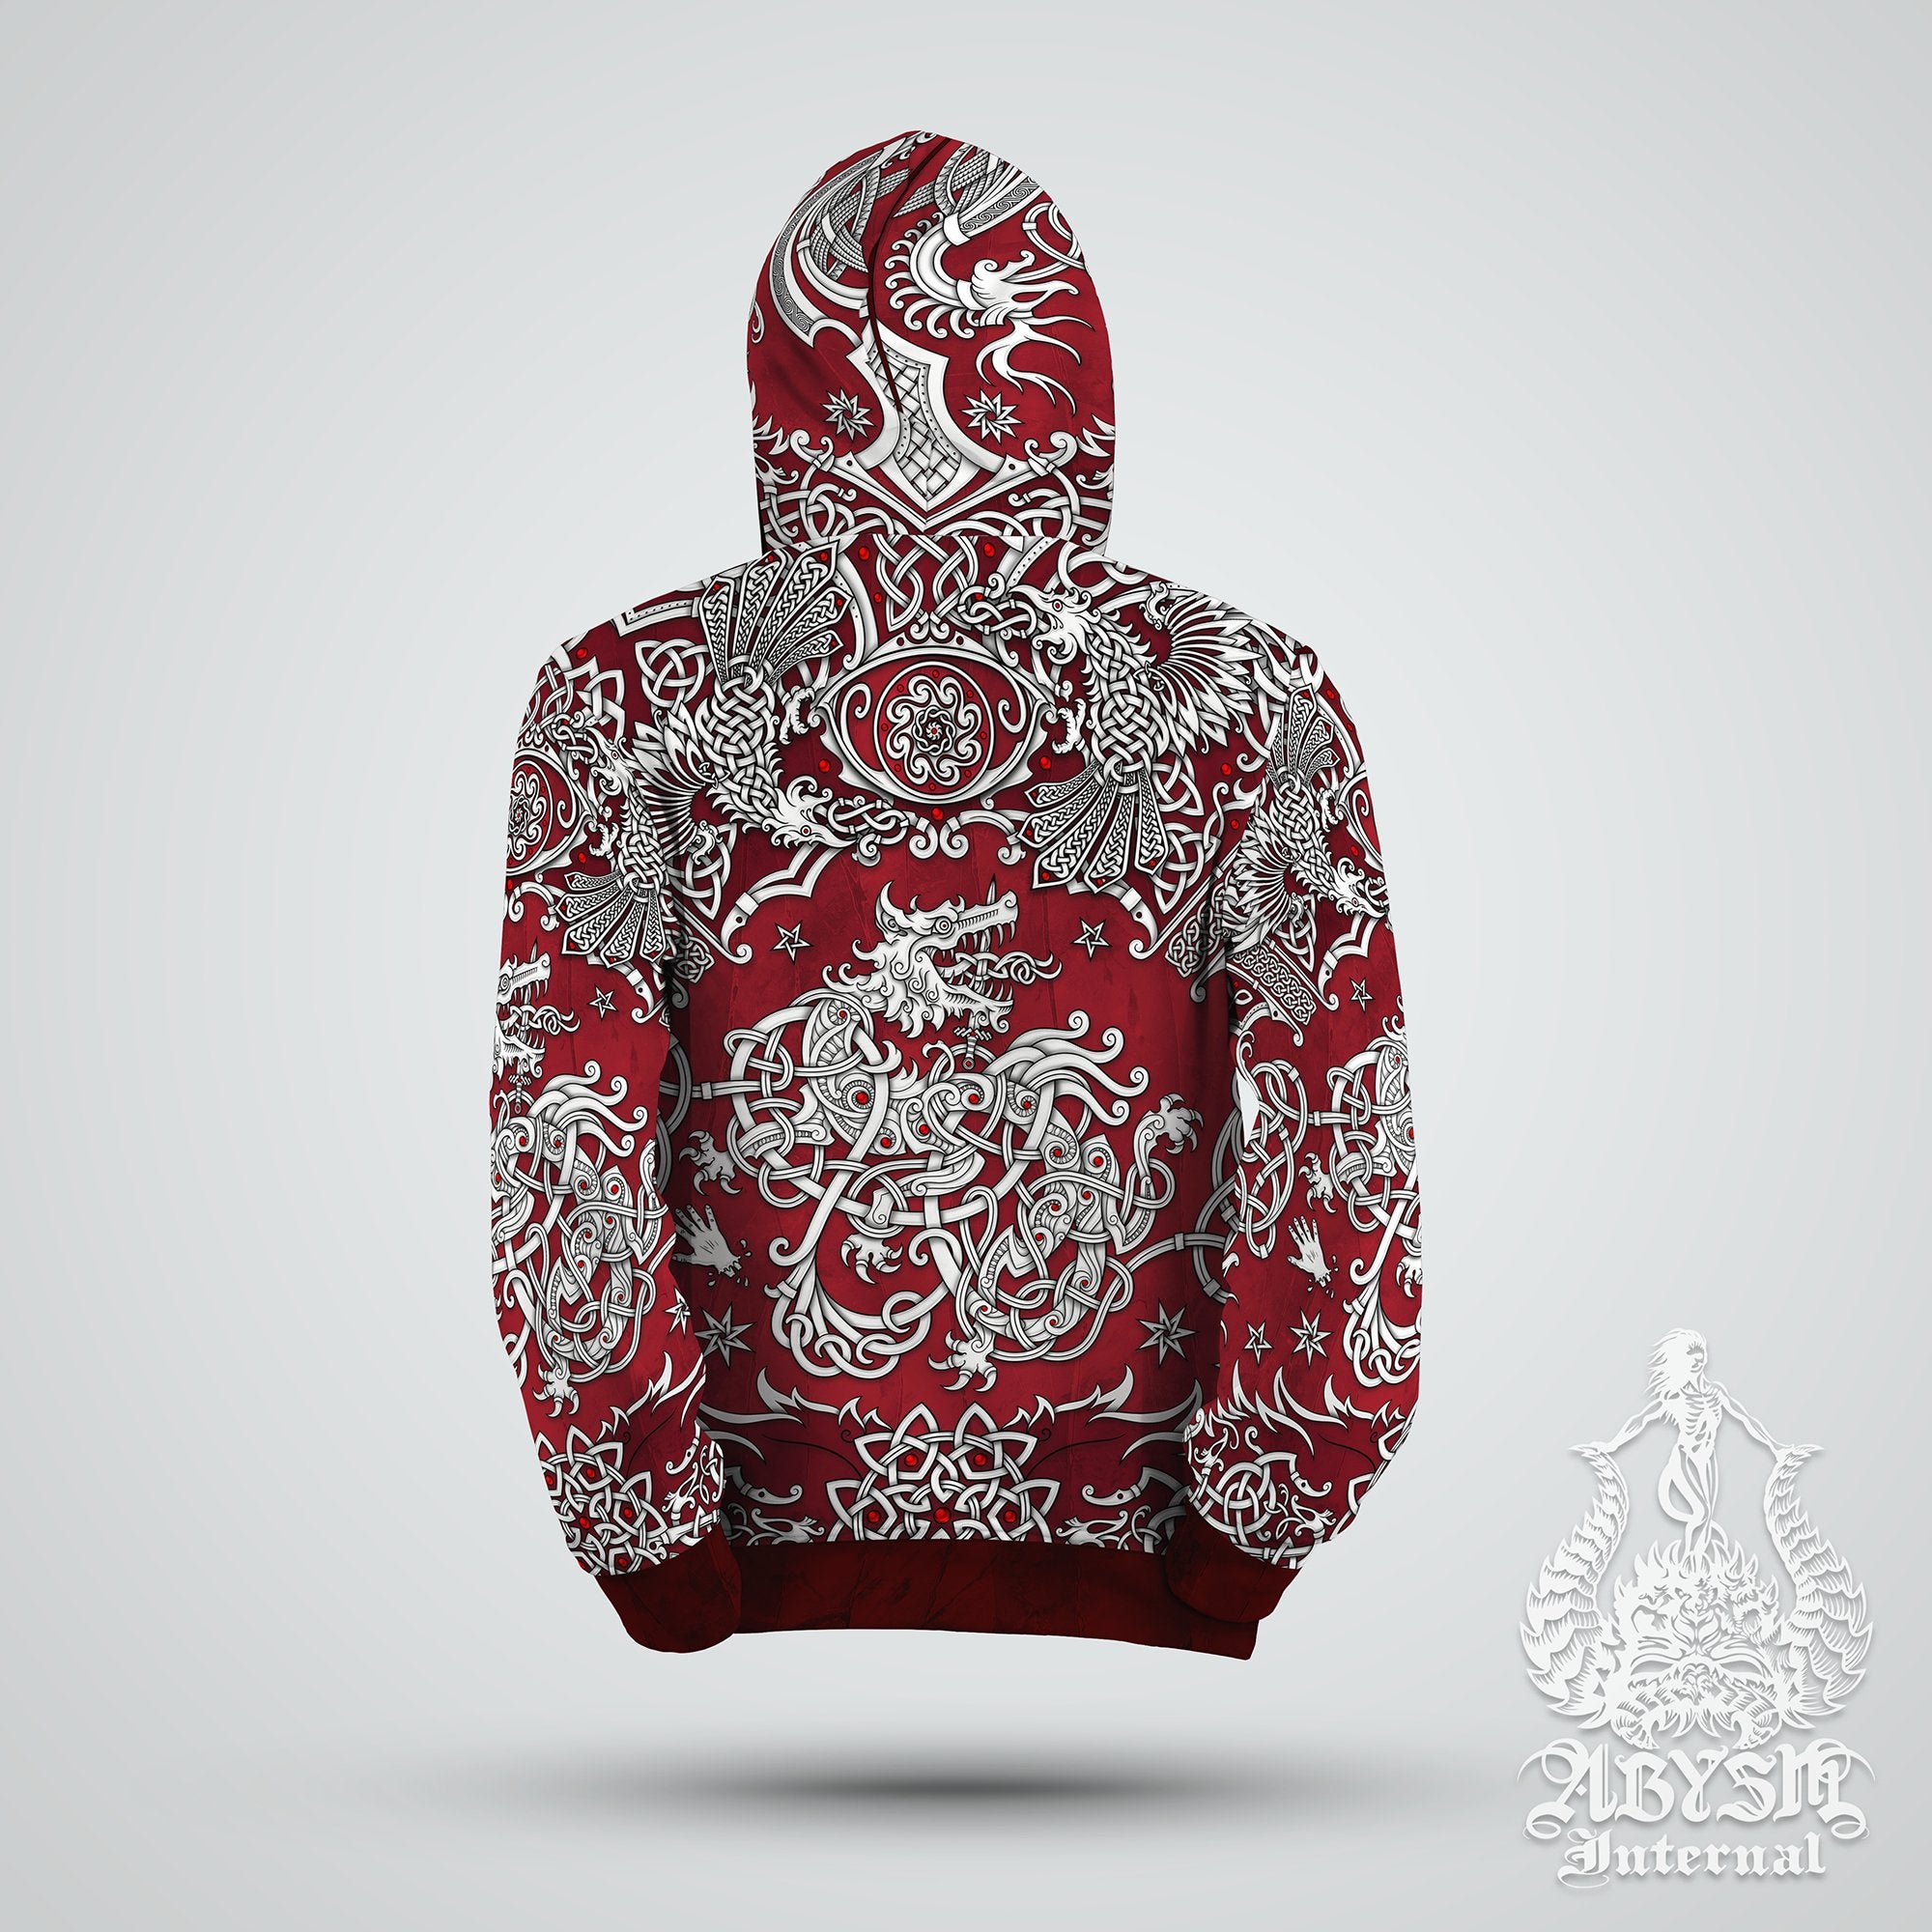 Fenrir Hoodie, Viking Wolf Sweater, Nordic Knotwork Pullover, Norse Art Street Outfit, Pagan Streetwear, Alternative Clothing, Unisex - White and Black, Red or Blue, 3 Colors - Abysm Internal